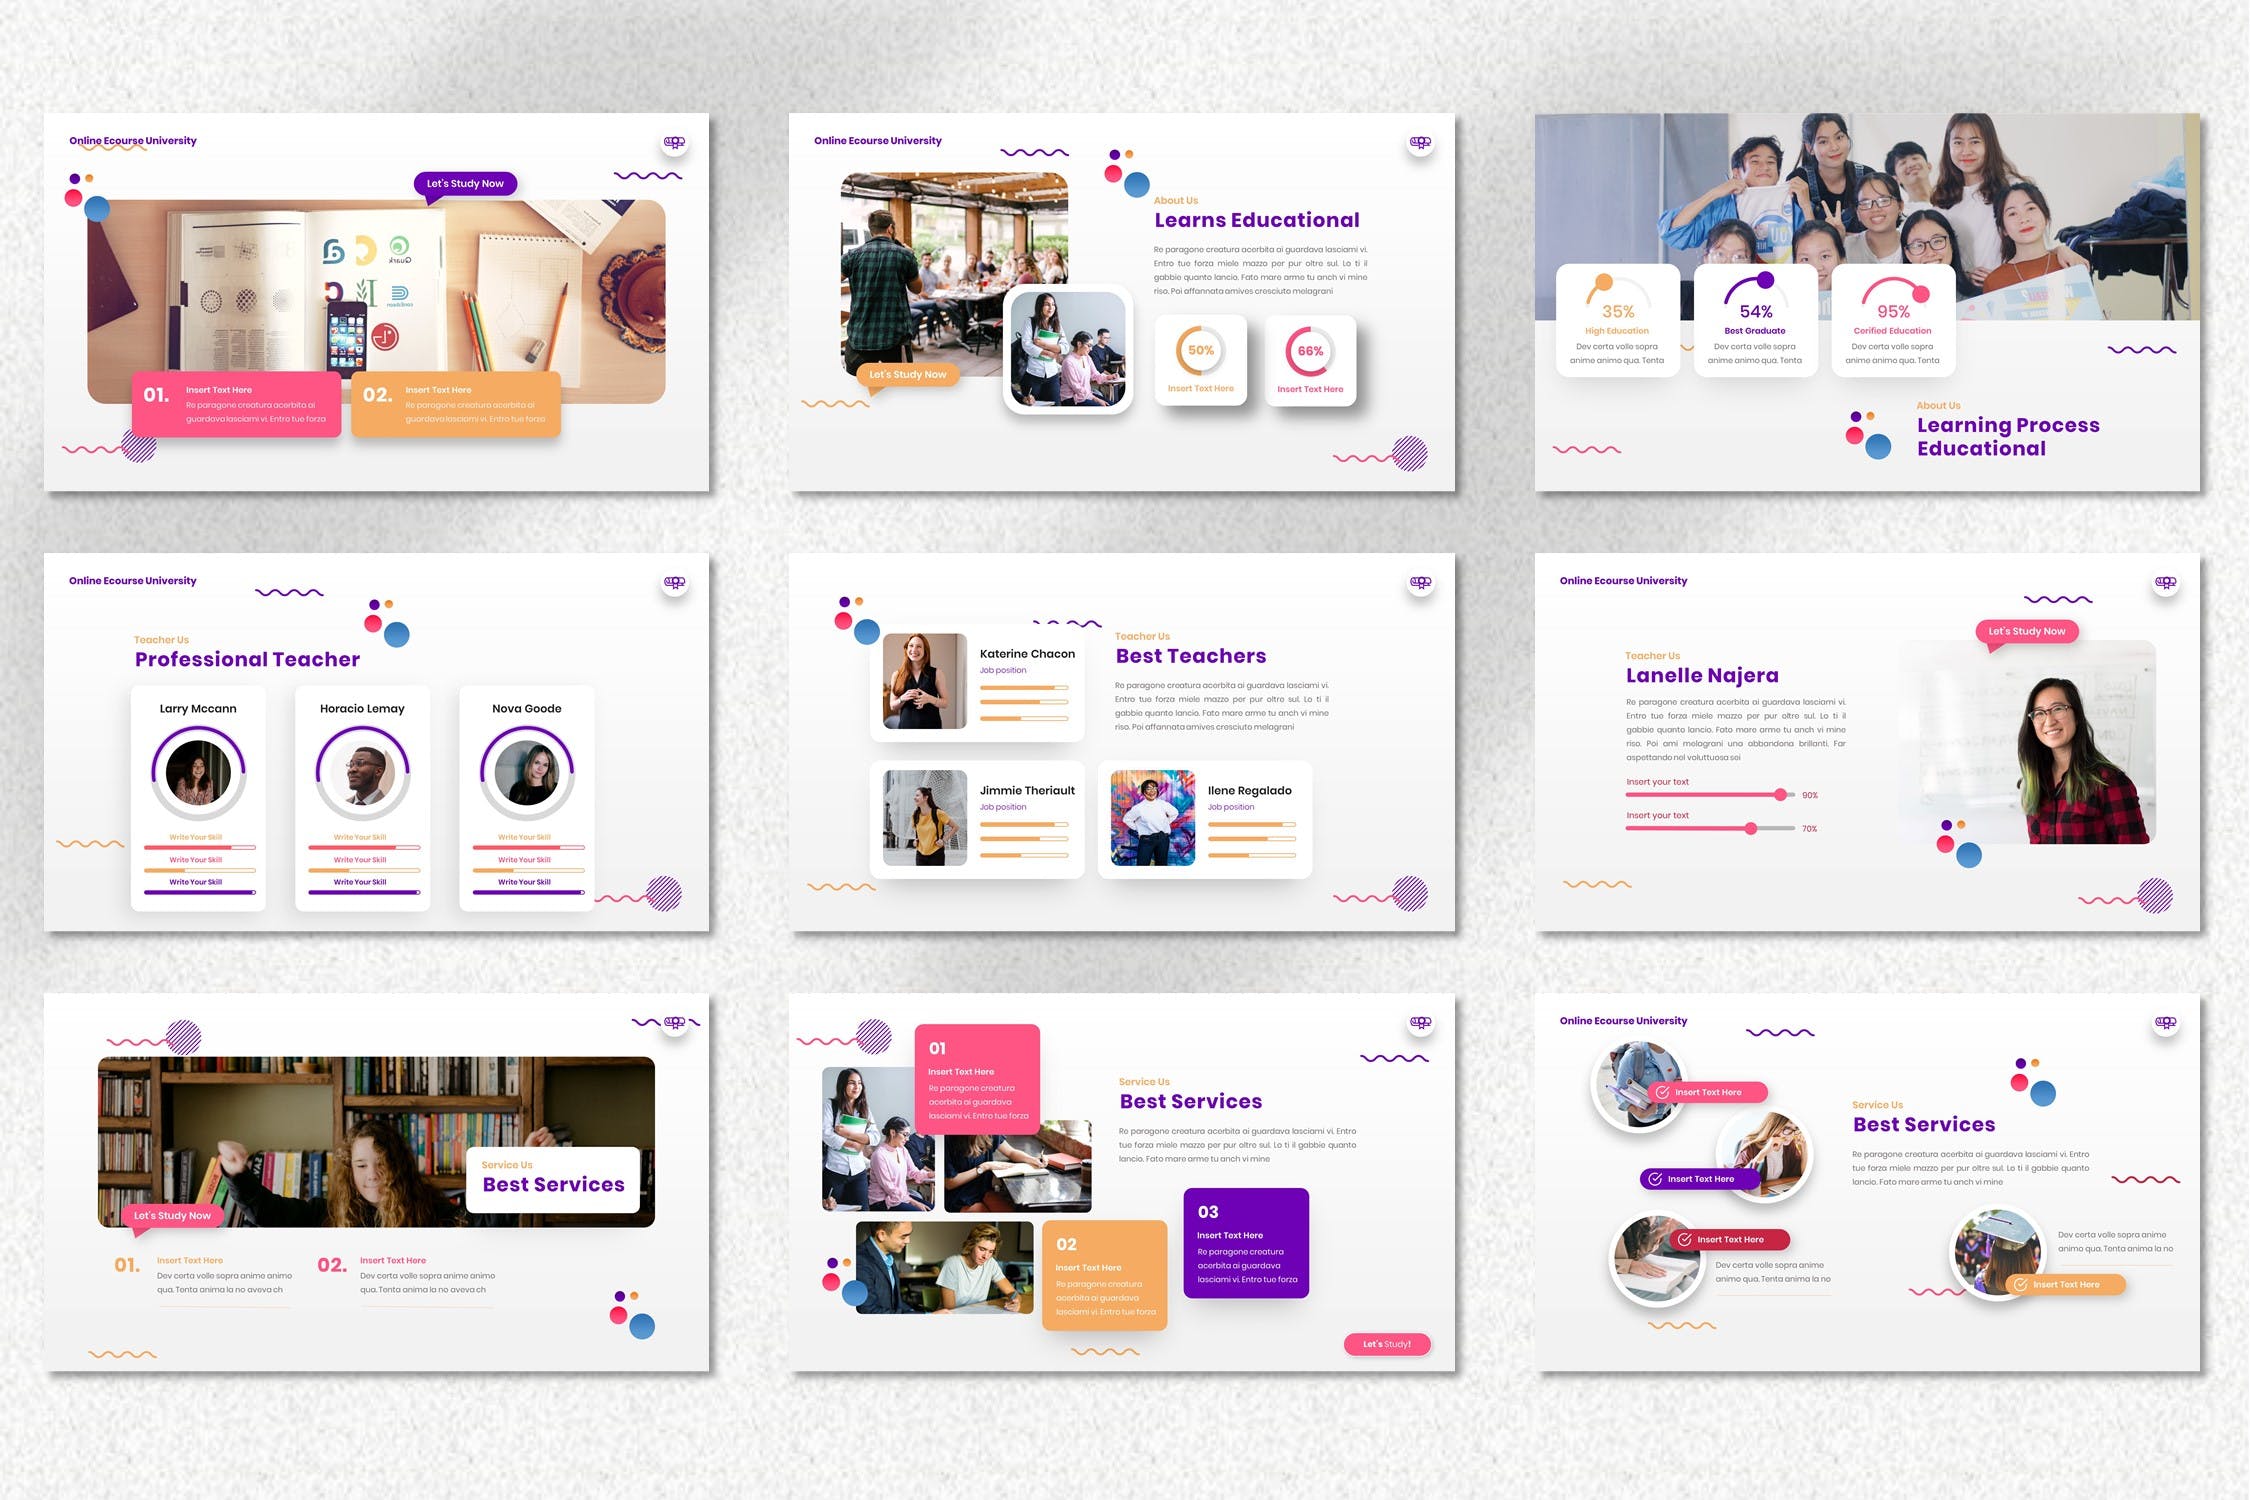 Cool template with purple, pink and orange elements.